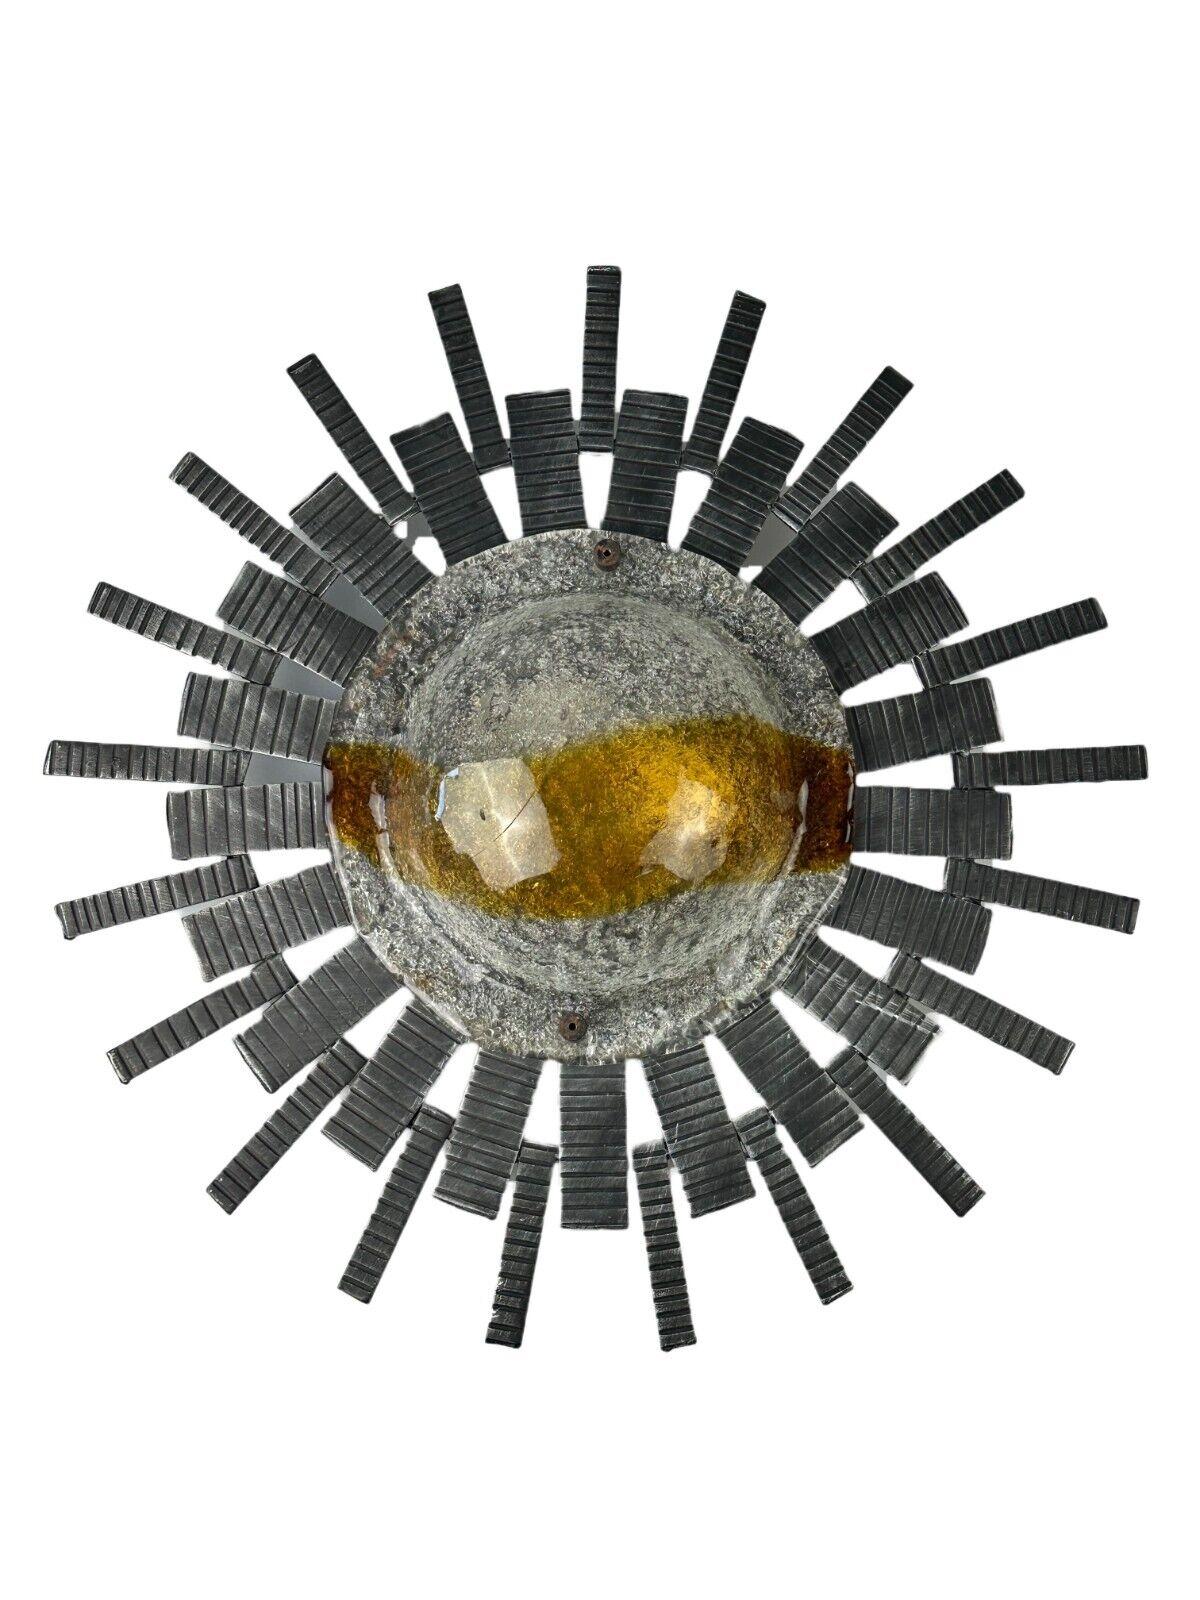 60s 70s Brutalist Wall Lamp Iron Glass Wall Sconce Space Age Design

Object: wall lamp

Manufacturer:

Condition: good

Age: around 1960-1970

Dimensions:

Diameter = 47.5cm
Height = 10.5cm

Material: iron, glass

Other notes:

E27 socket

The